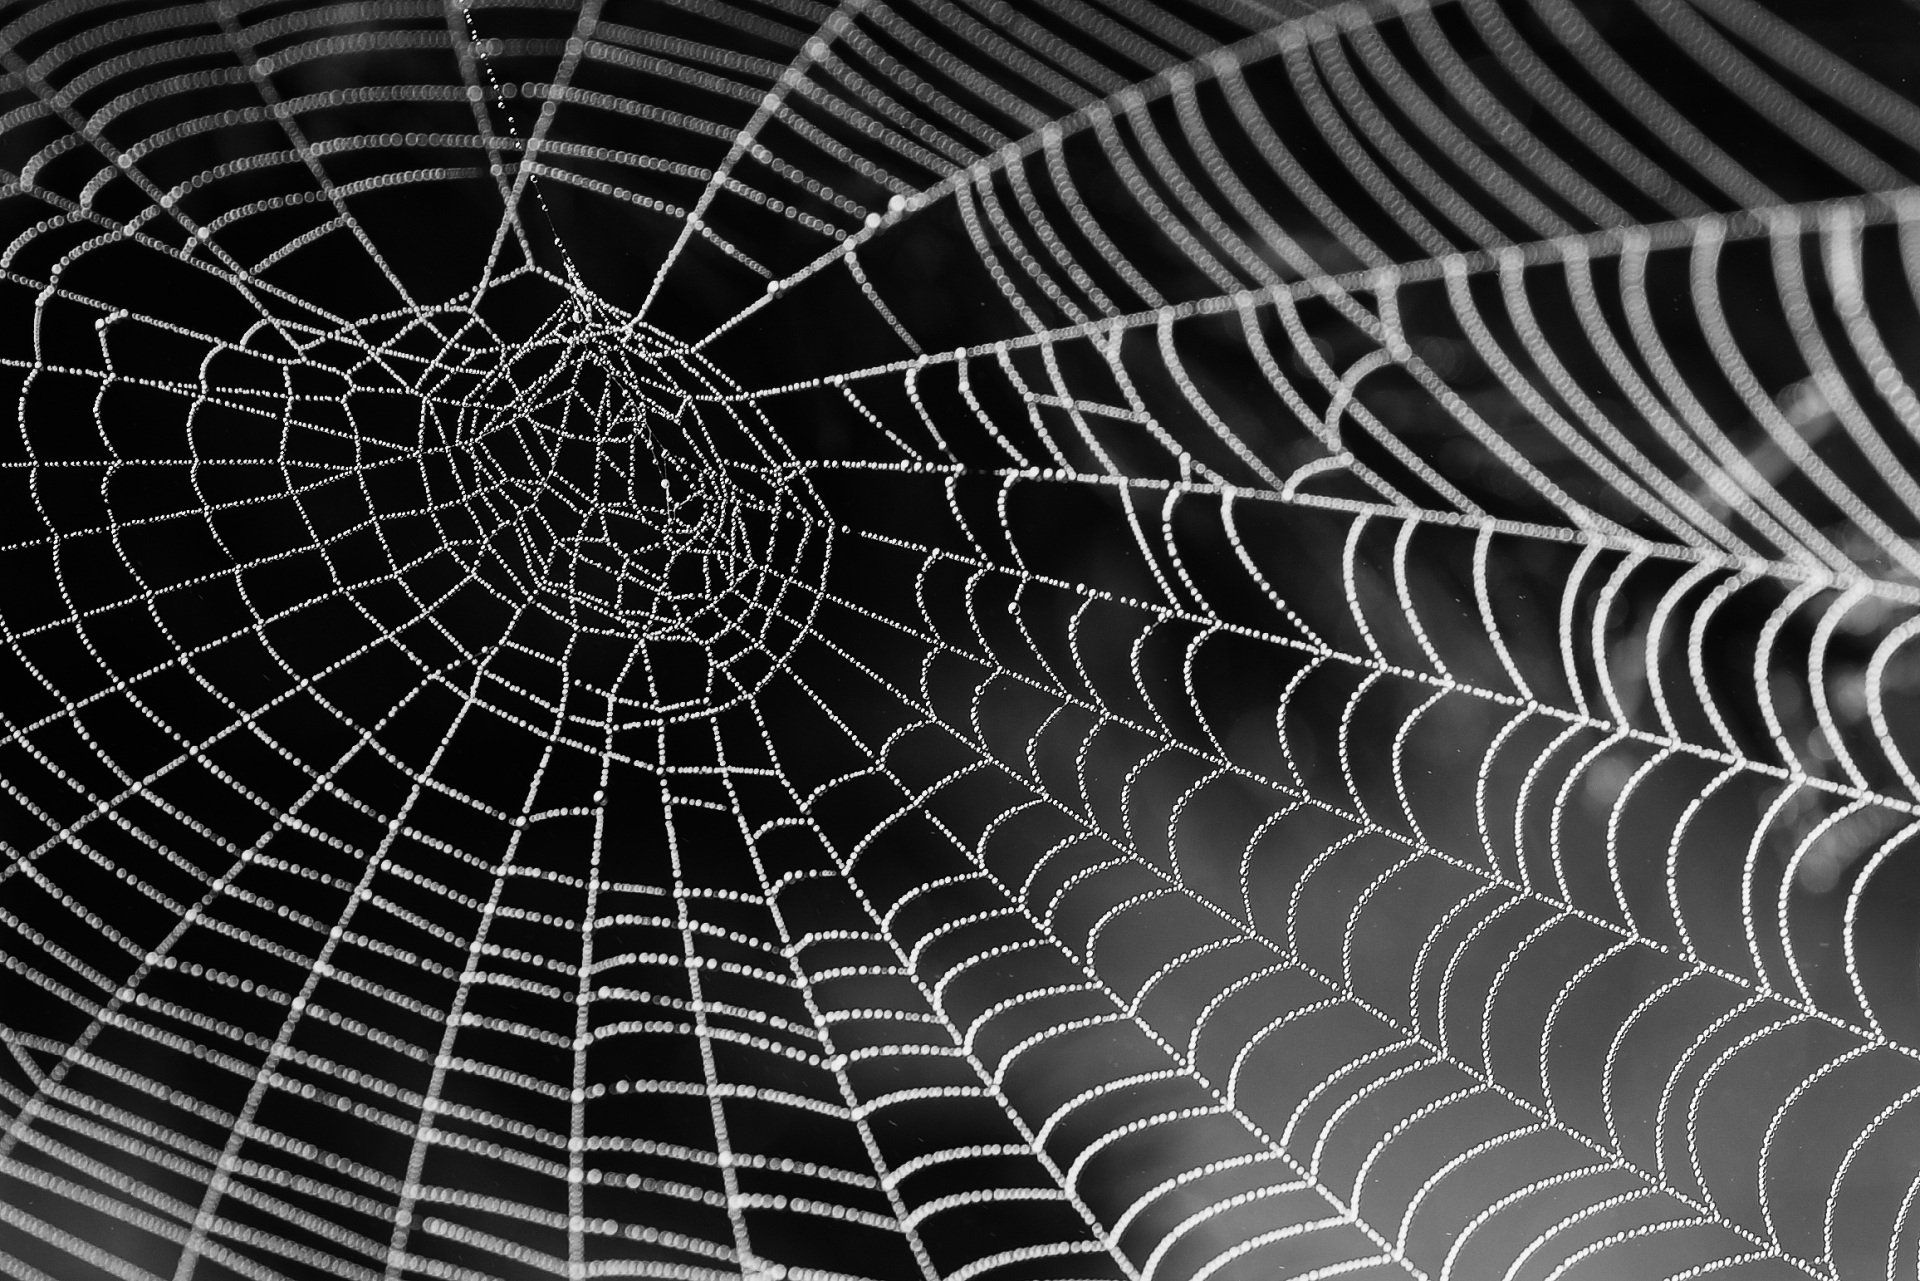 Picture of a spider web.